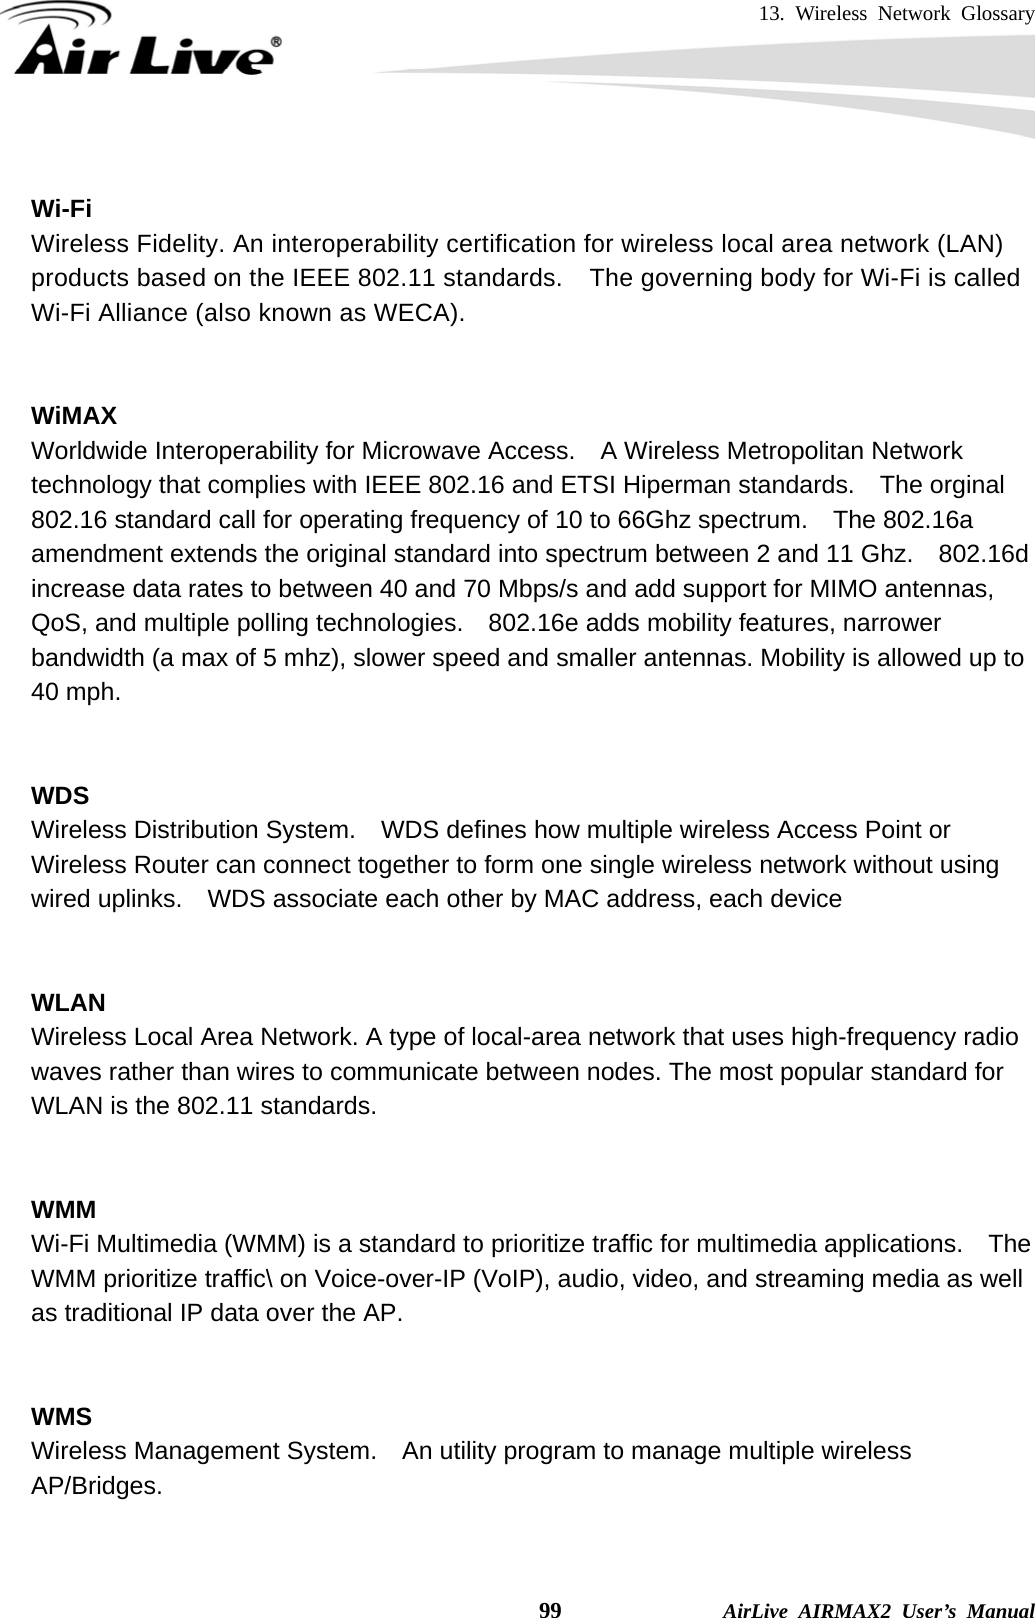 13. Wireless Network Glossary    99              AirLive AIRMAX2 User’s Manual  Wi-Fi   Wireless Fidelity. An interoperability certification for wireless local area network (LAN) products based on the IEEE 802.11 standards.  The governing body for Wi-Fi is called Wi-Fi Alliance (also known as WECA).   WiMAX Worldwide Interoperability for Microwave Access.    A Wireless Metropolitan Network technology that complies with IEEE 802.16 and ETSI Hiperman standards.    The orginal 802.16 standard call for operating frequency of 10 to 66Ghz spectrum.    The 802.16a amendment extends the original standard into spectrum between 2 and 11 Ghz.    802.16d increase data rates to between 40 and 70 Mbps/s and add support for MIMO antennas, QoS, and multiple polling technologies.    802.16e adds mobility features, narrower bandwidth (a max of 5 mhz), slower speed and smaller antennas. Mobility is allowed up to 40 mph.     WDS Wireless Distribution System.    WDS defines how multiple wireless Access Point or Wireless Router can connect together to form one single wireless network without using wired uplinks.    WDS associate each other by MAC address, each device     WLAN Wireless Local Area Network. A type of local-area network that uses high-frequency radio waves rather than wires to communicate between nodes. The most popular standard for WLAN is the 802.11 standards.   WMM Wi-Fi Multimedia (WMM) is a standard to prioritize traffic for multimedia applications.    The WMM prioritize traffic\ on Voice-over-IP (VoIP), audio, video, and streaming media as well as traditional IP data over the AP.   WMS Wireless Management System.    An utility program to manage multiple wireless AP/Bridges.   